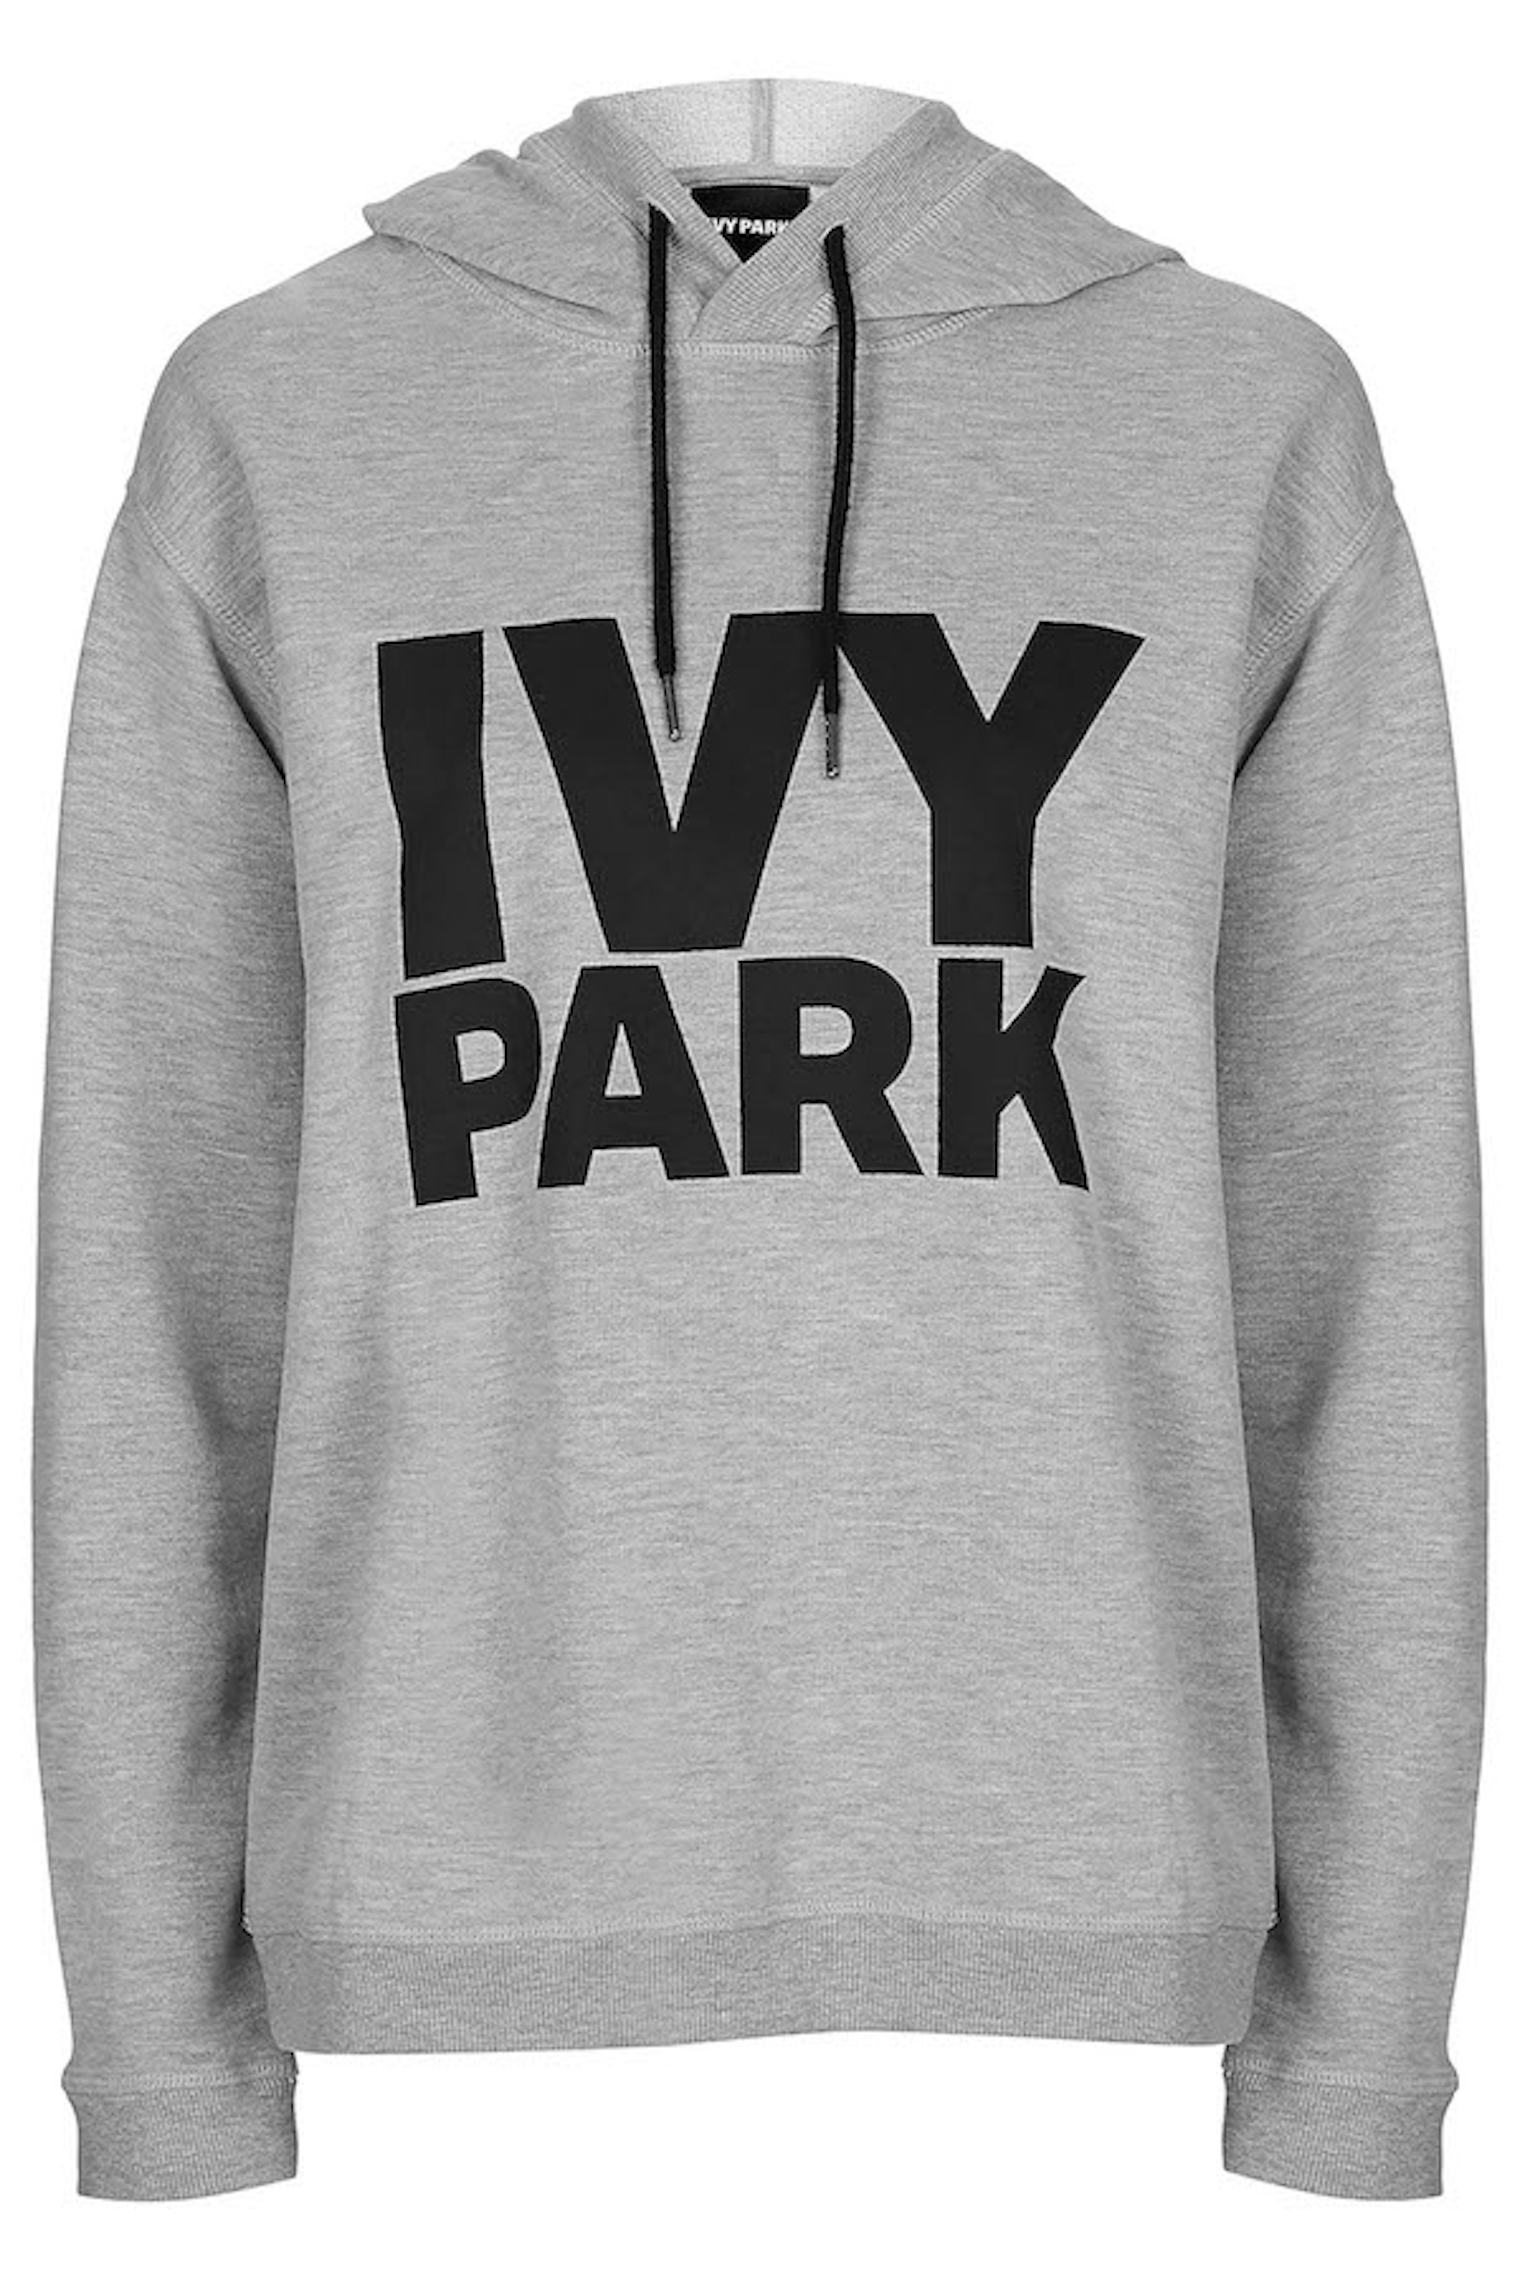 See Every Piece From Beyonce’s Activewear Line, Ivy Park